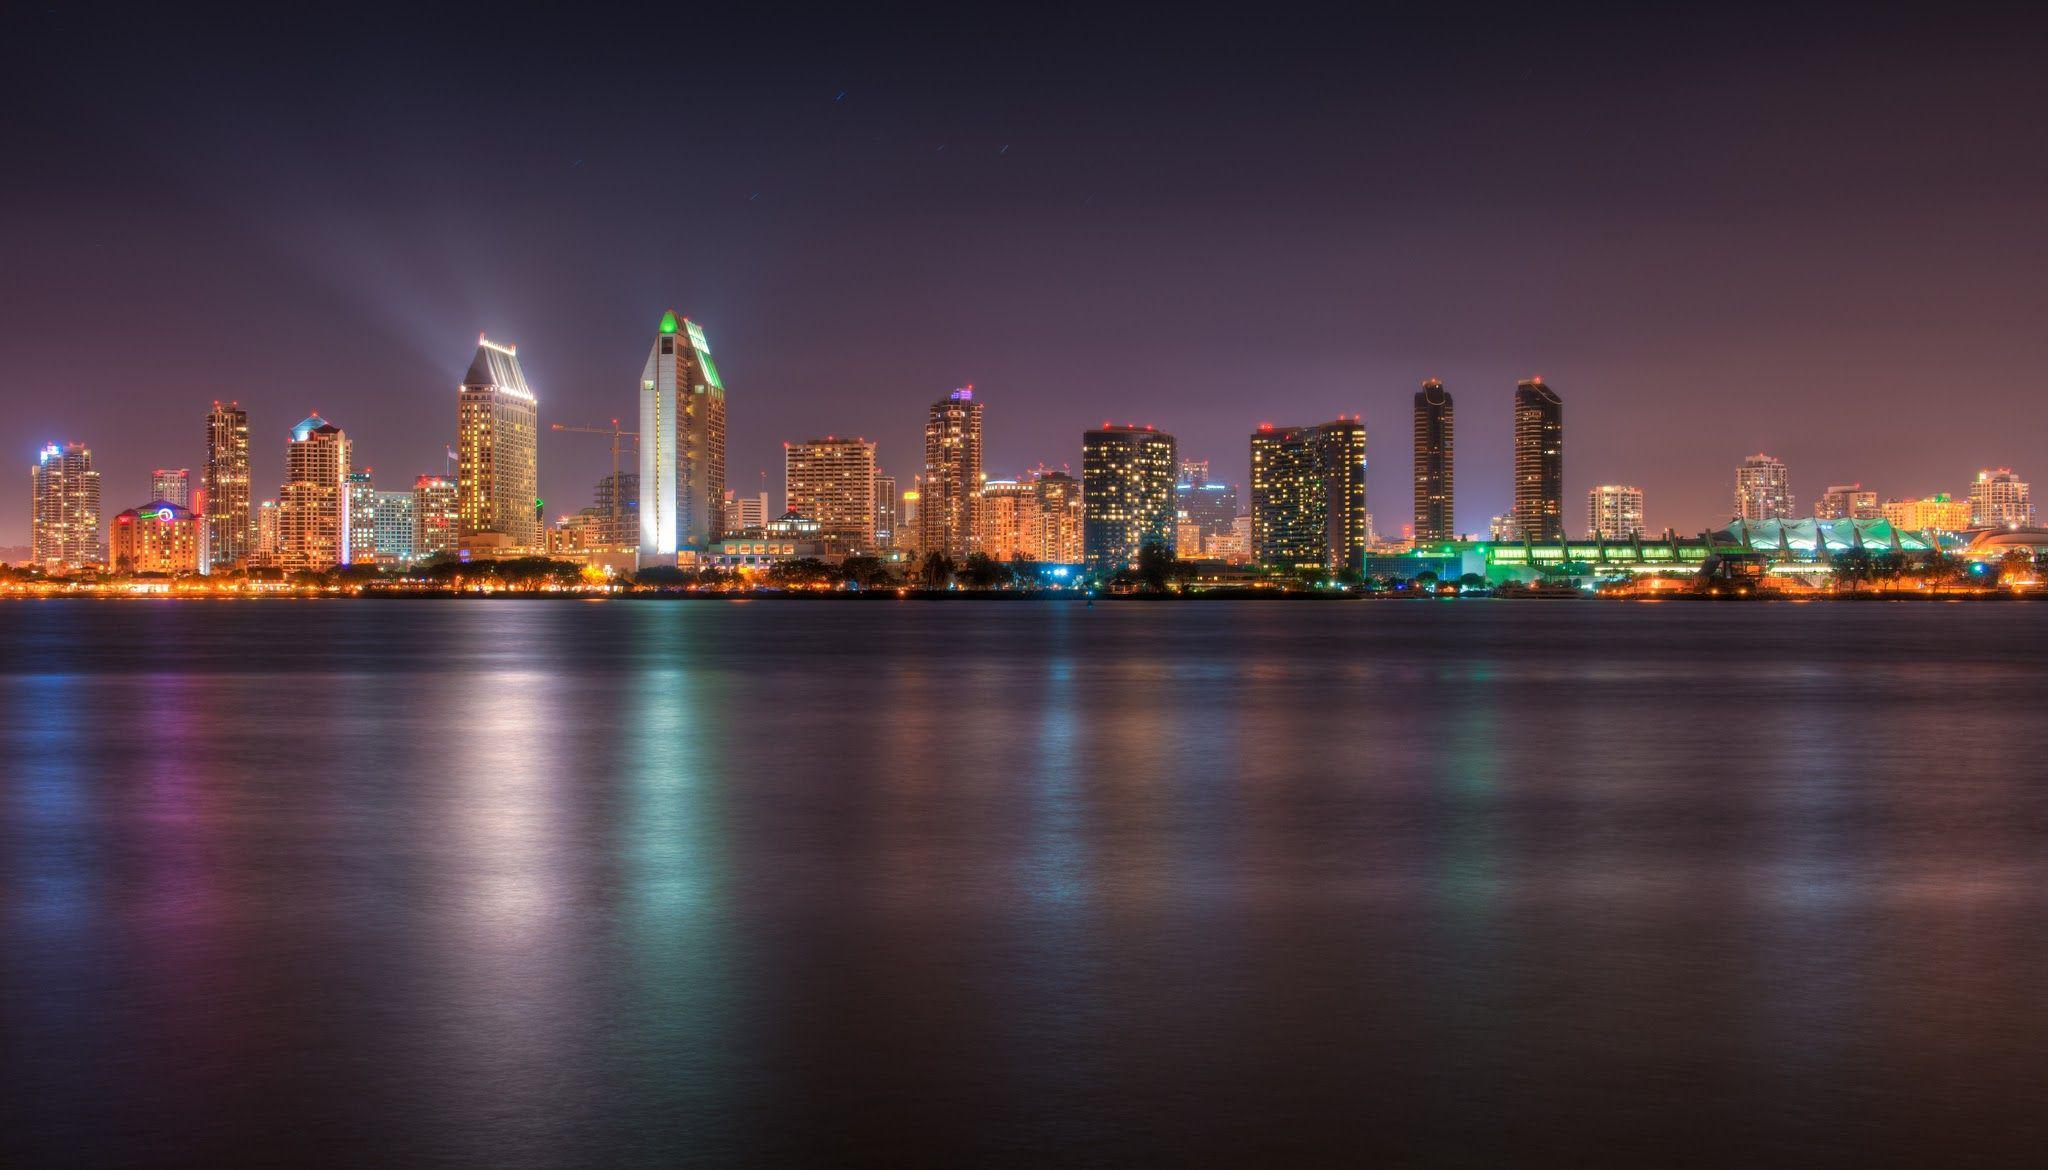 San Diego Skyline Widescreen HD Wallpaper. Recipes to Cook